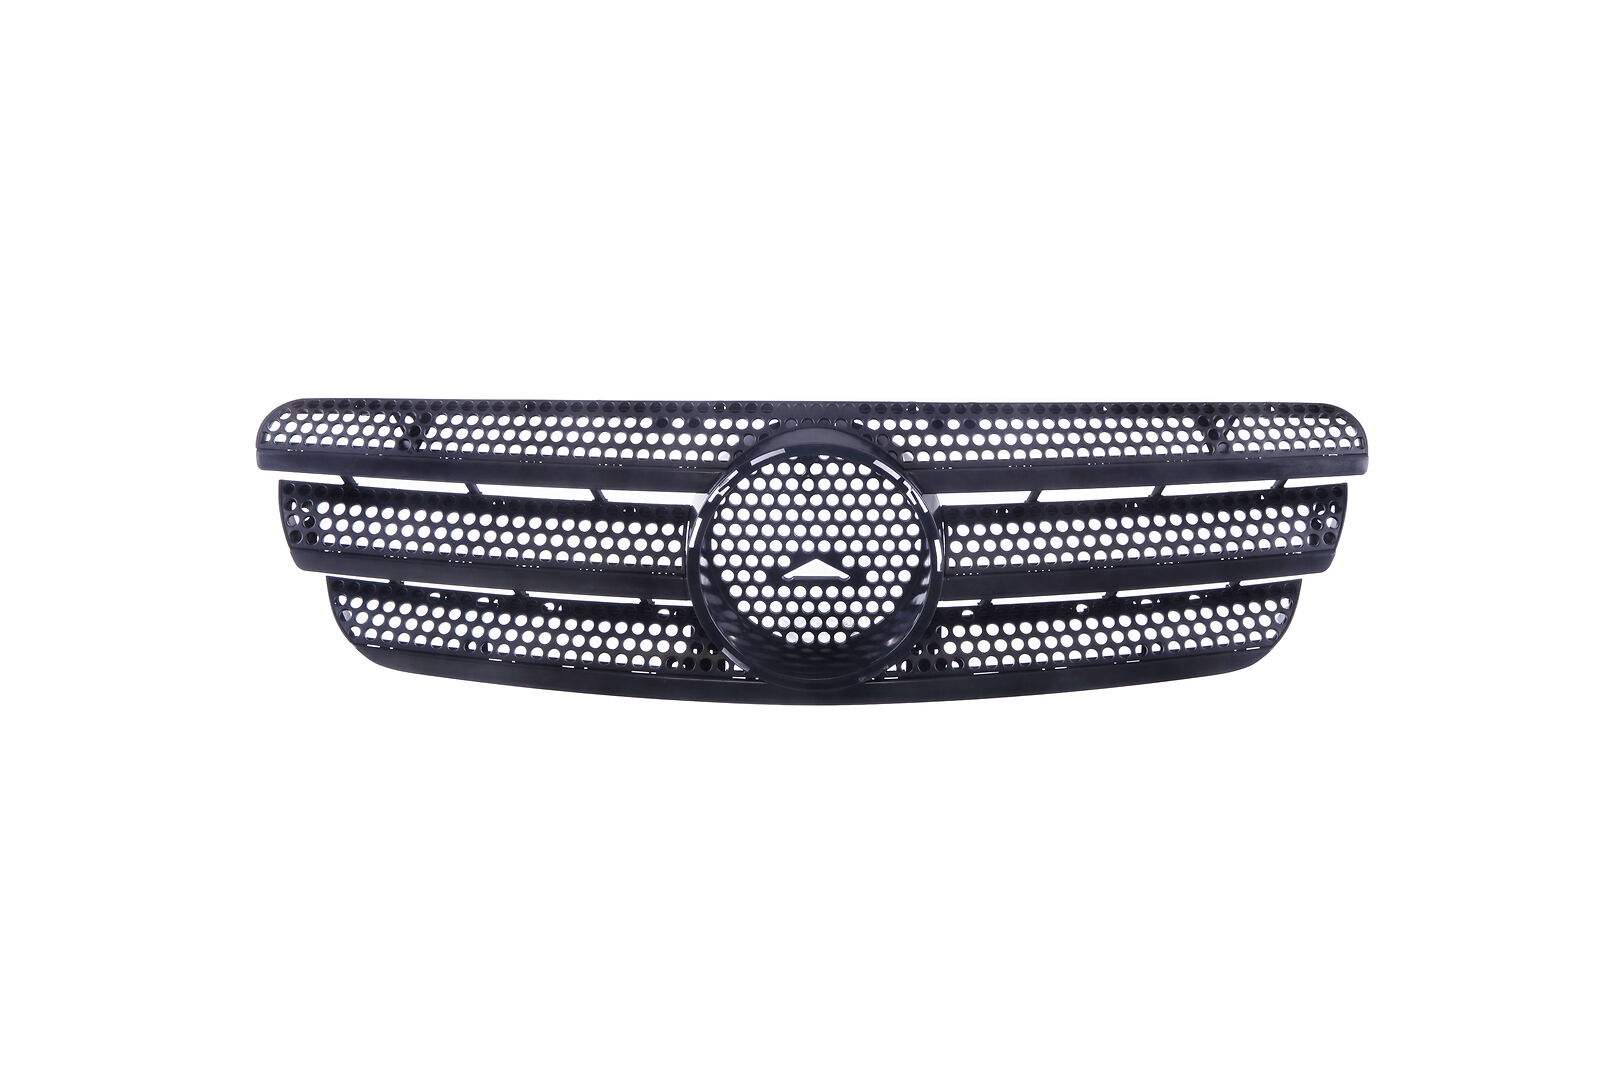 New Front Grille For Mercedes-Benz ML430 99-01 ML320 98-03 ML350 03-05 Black